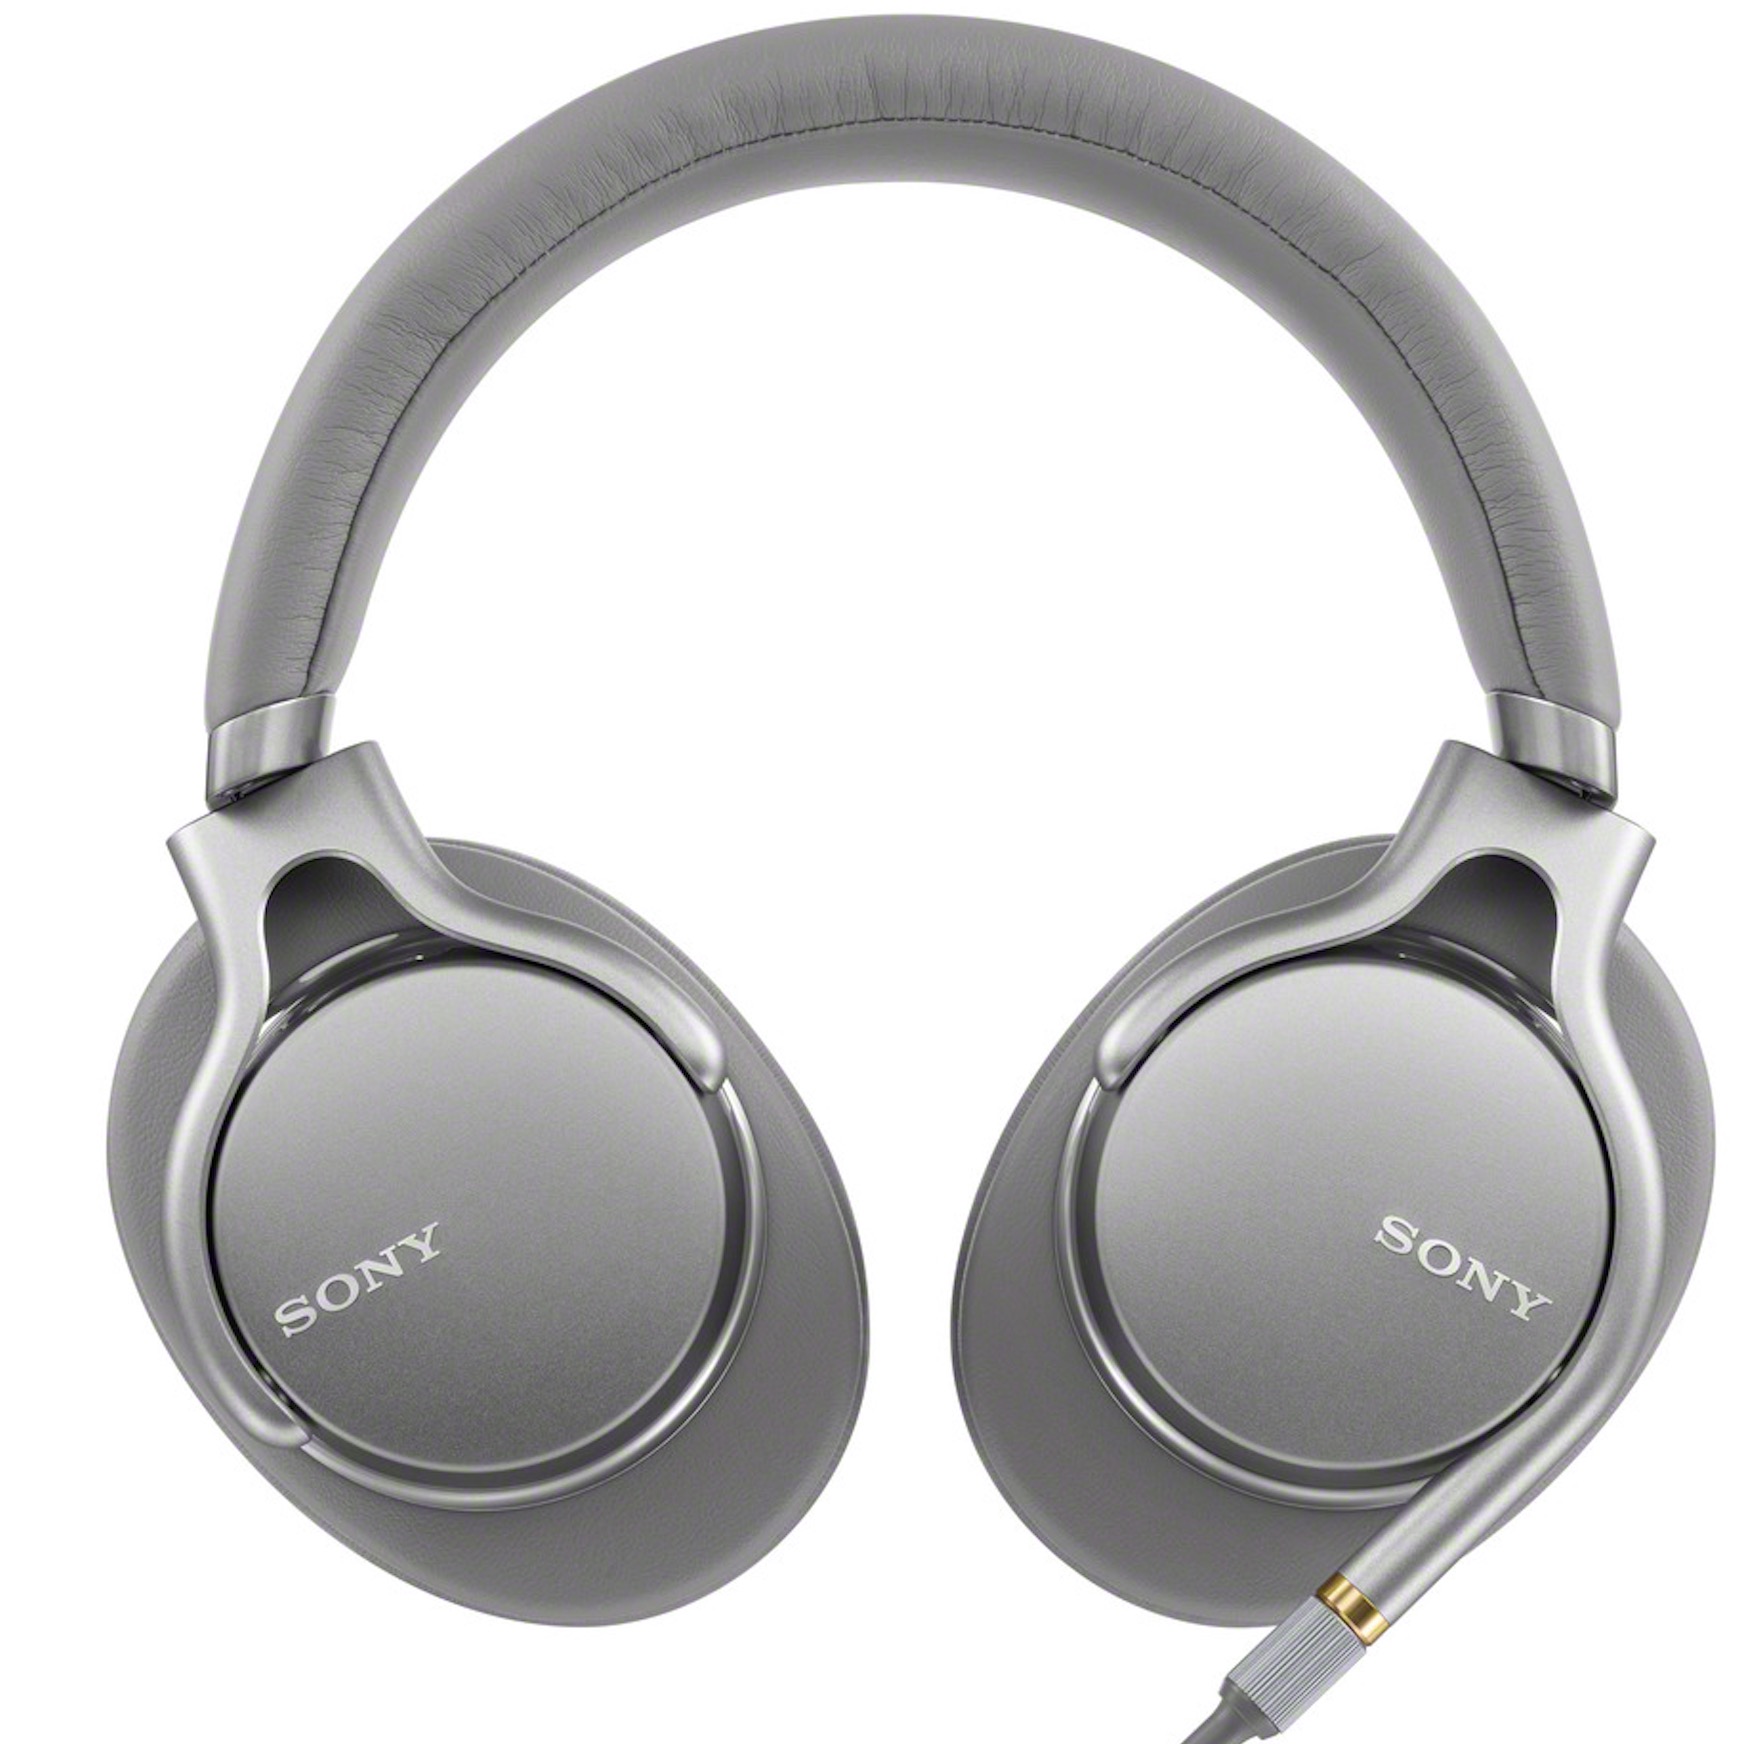 MDR-1AM2 Headphones from Sony: With a New 40mm driver